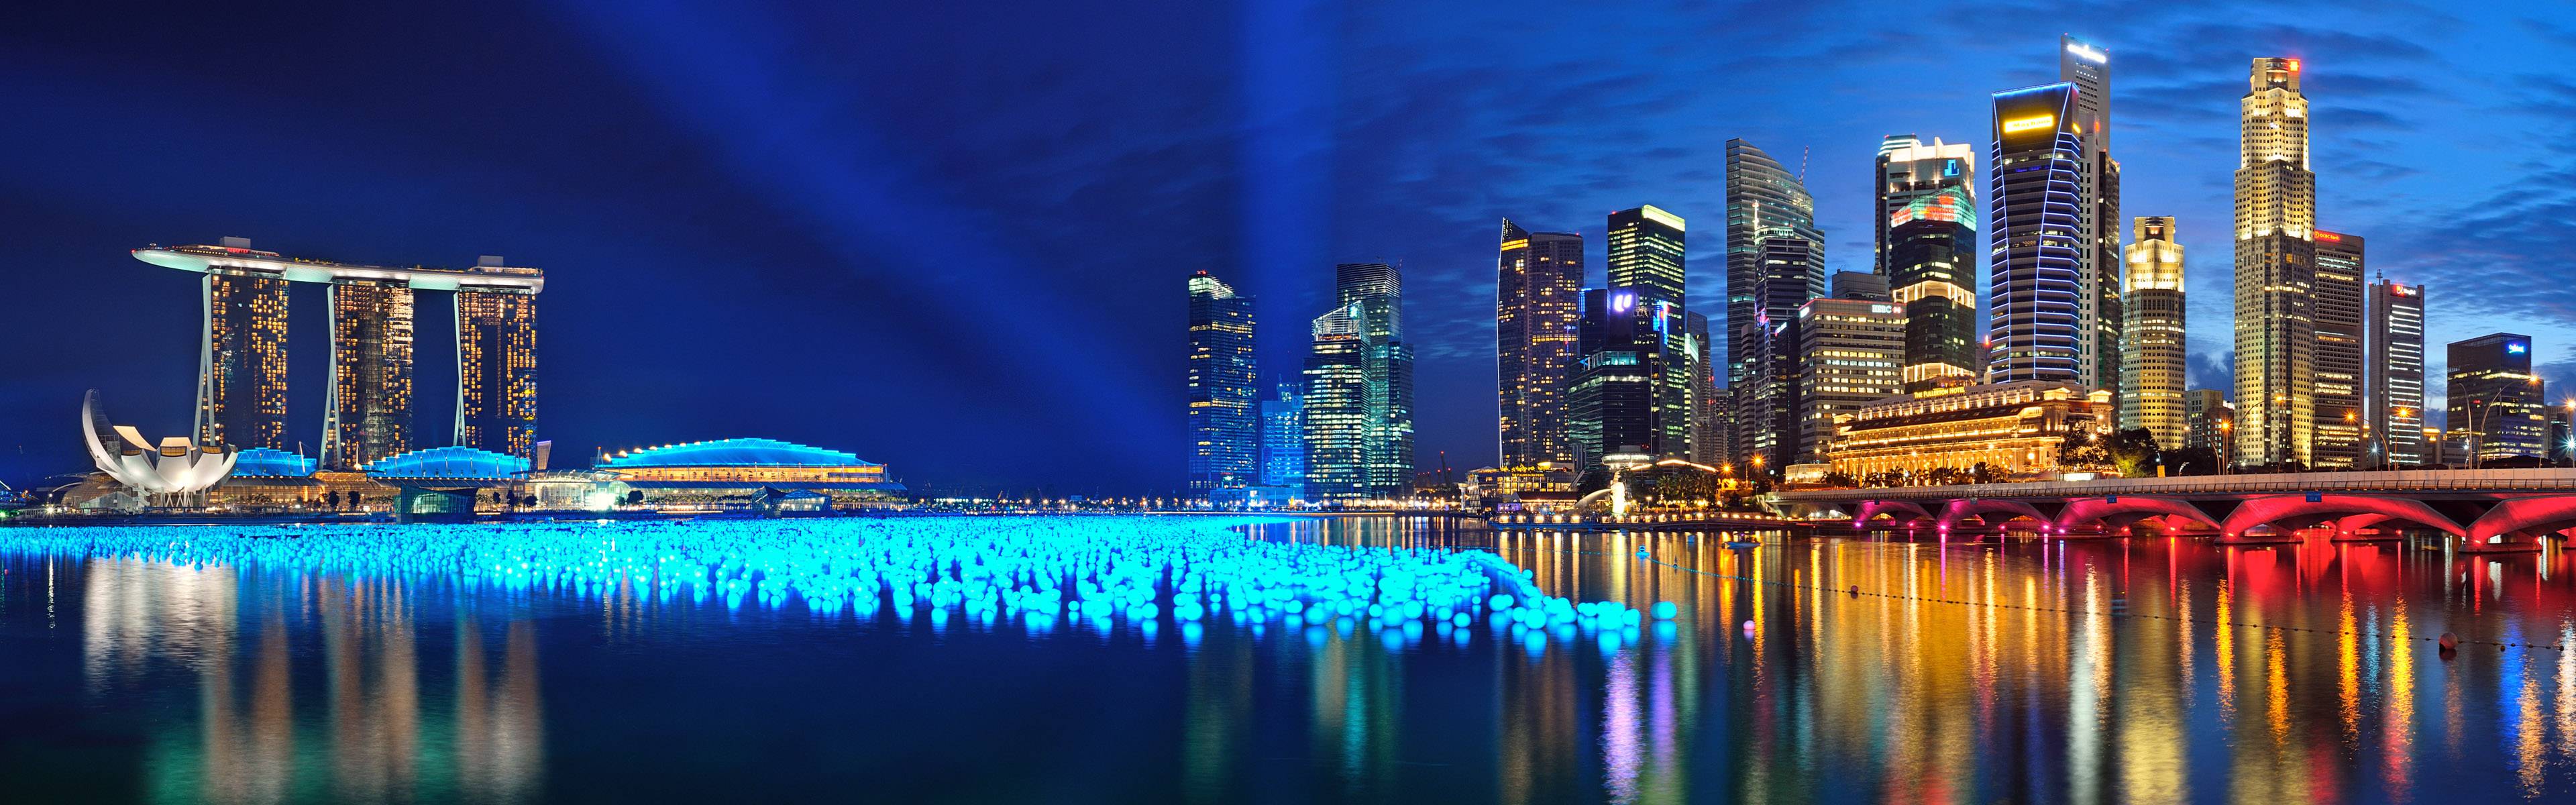 Cityscapes panoramic wallpaper theme for Windows 8   Windows 8